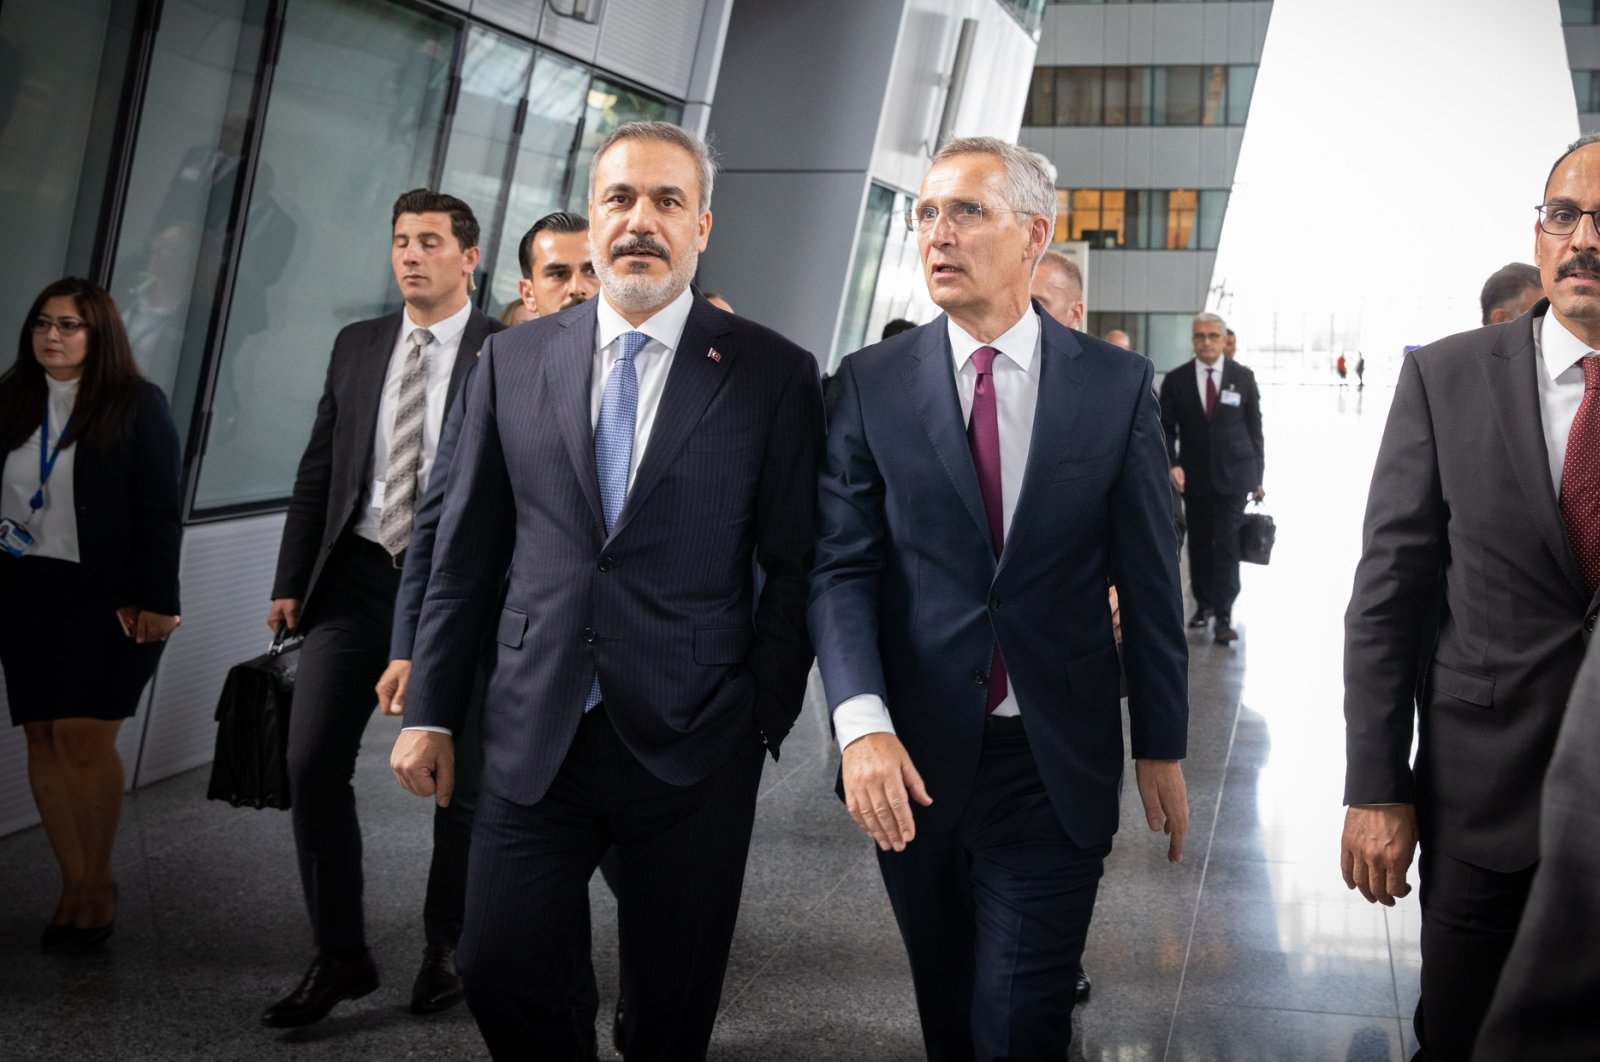 Türkiye’s Foreign Minister Hakan Fidan (L) and NATO Secretary-General Jens Stoltenberg (C) are seen before a trilateral meeting between Türkiye, Sweden and Finland at the NATO headquarters in Brussels, Belgium, July 6, 2023. (AA Photo)